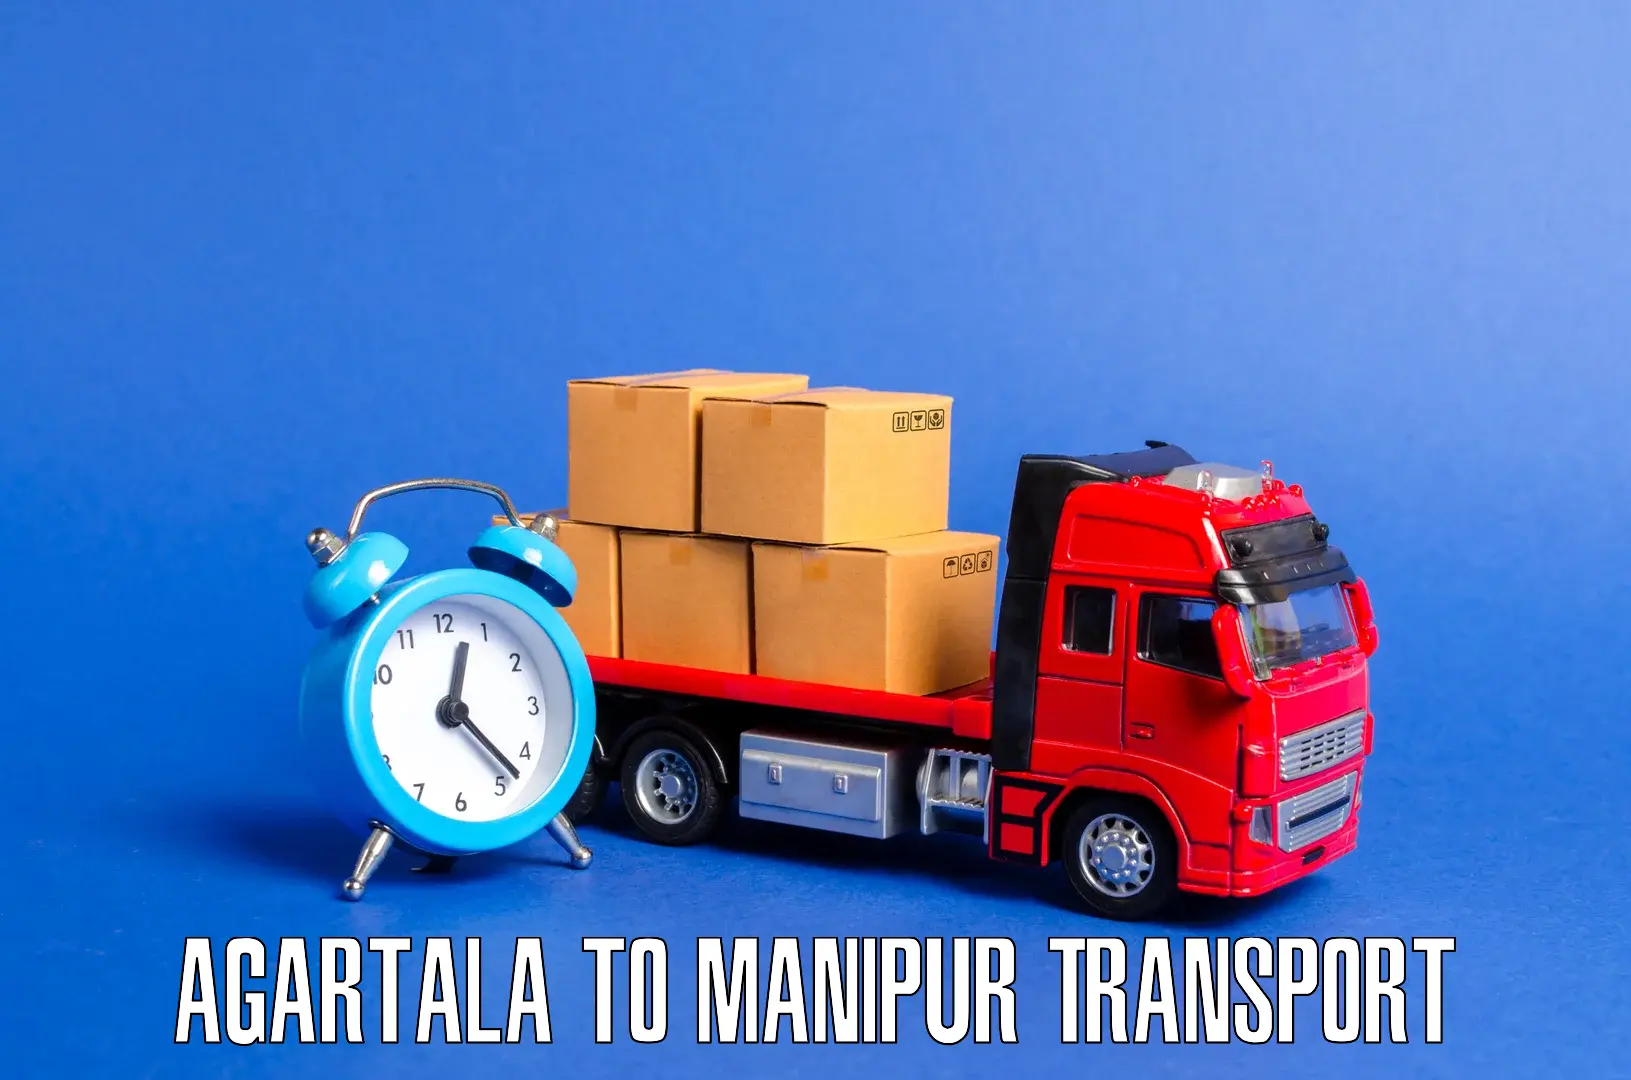 Nationwide transport services Agartala to Imphal